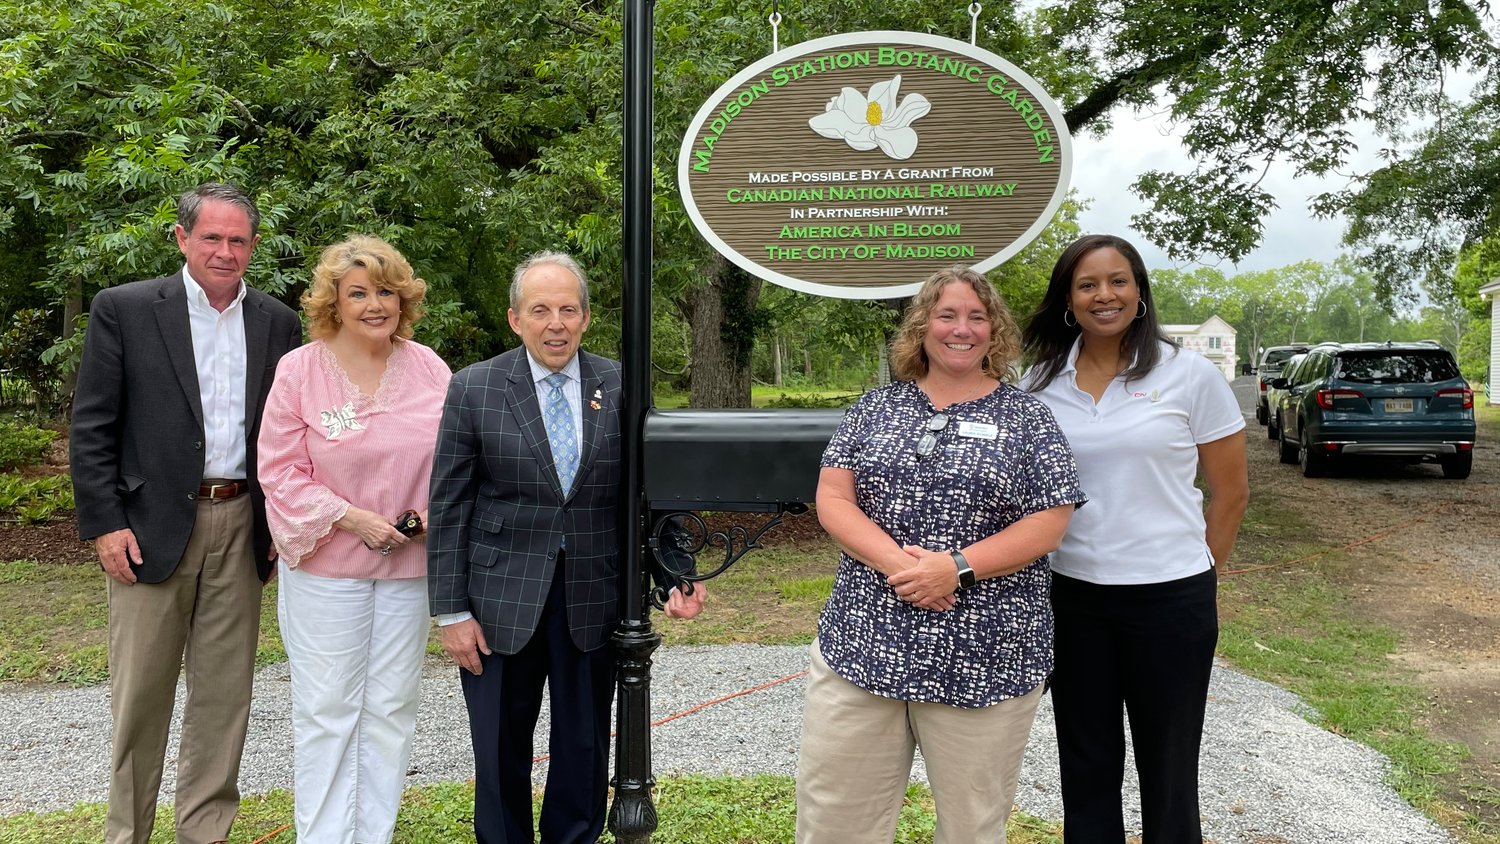 Alan Hoops, Mayor Mary Hawkins-Butler, Marvin Miller, Laura Kunkle, and Stacey Lyons pose next to the new sign hon- oring the Madison Station Botanic Garden on the historic Montgomery House Grounds.